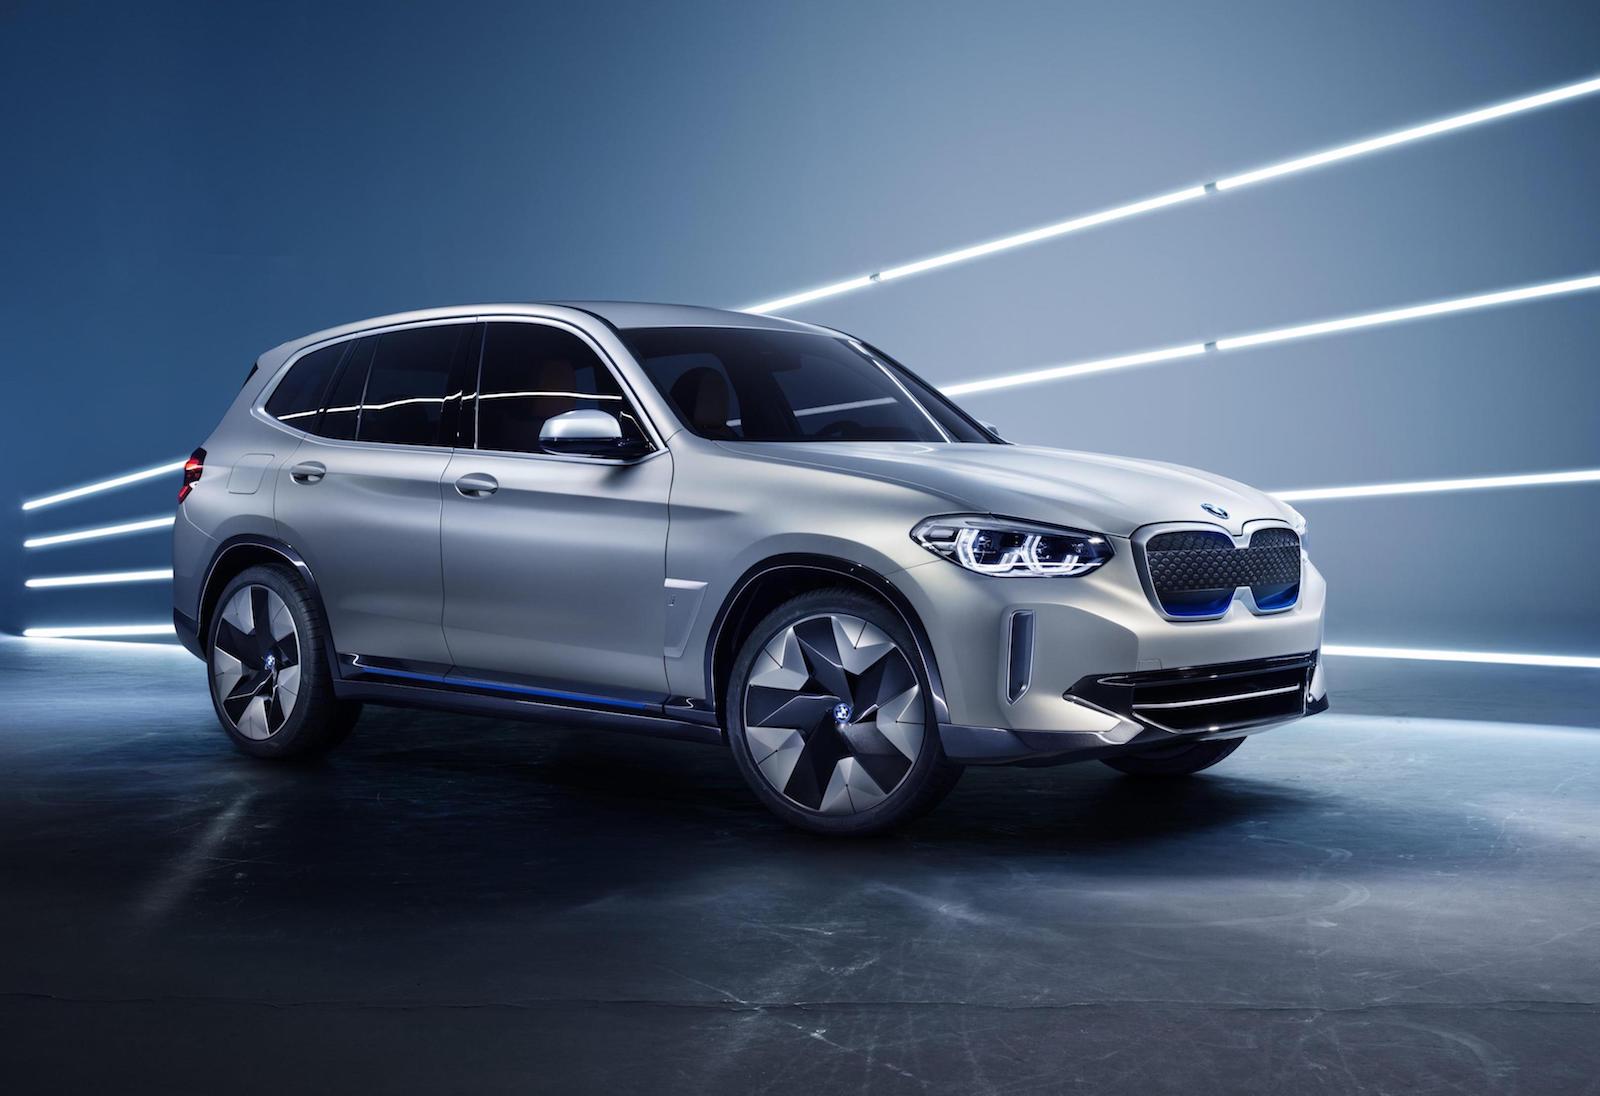 BMW iX3 concept unveiled, previews all-electric SUV for 2020